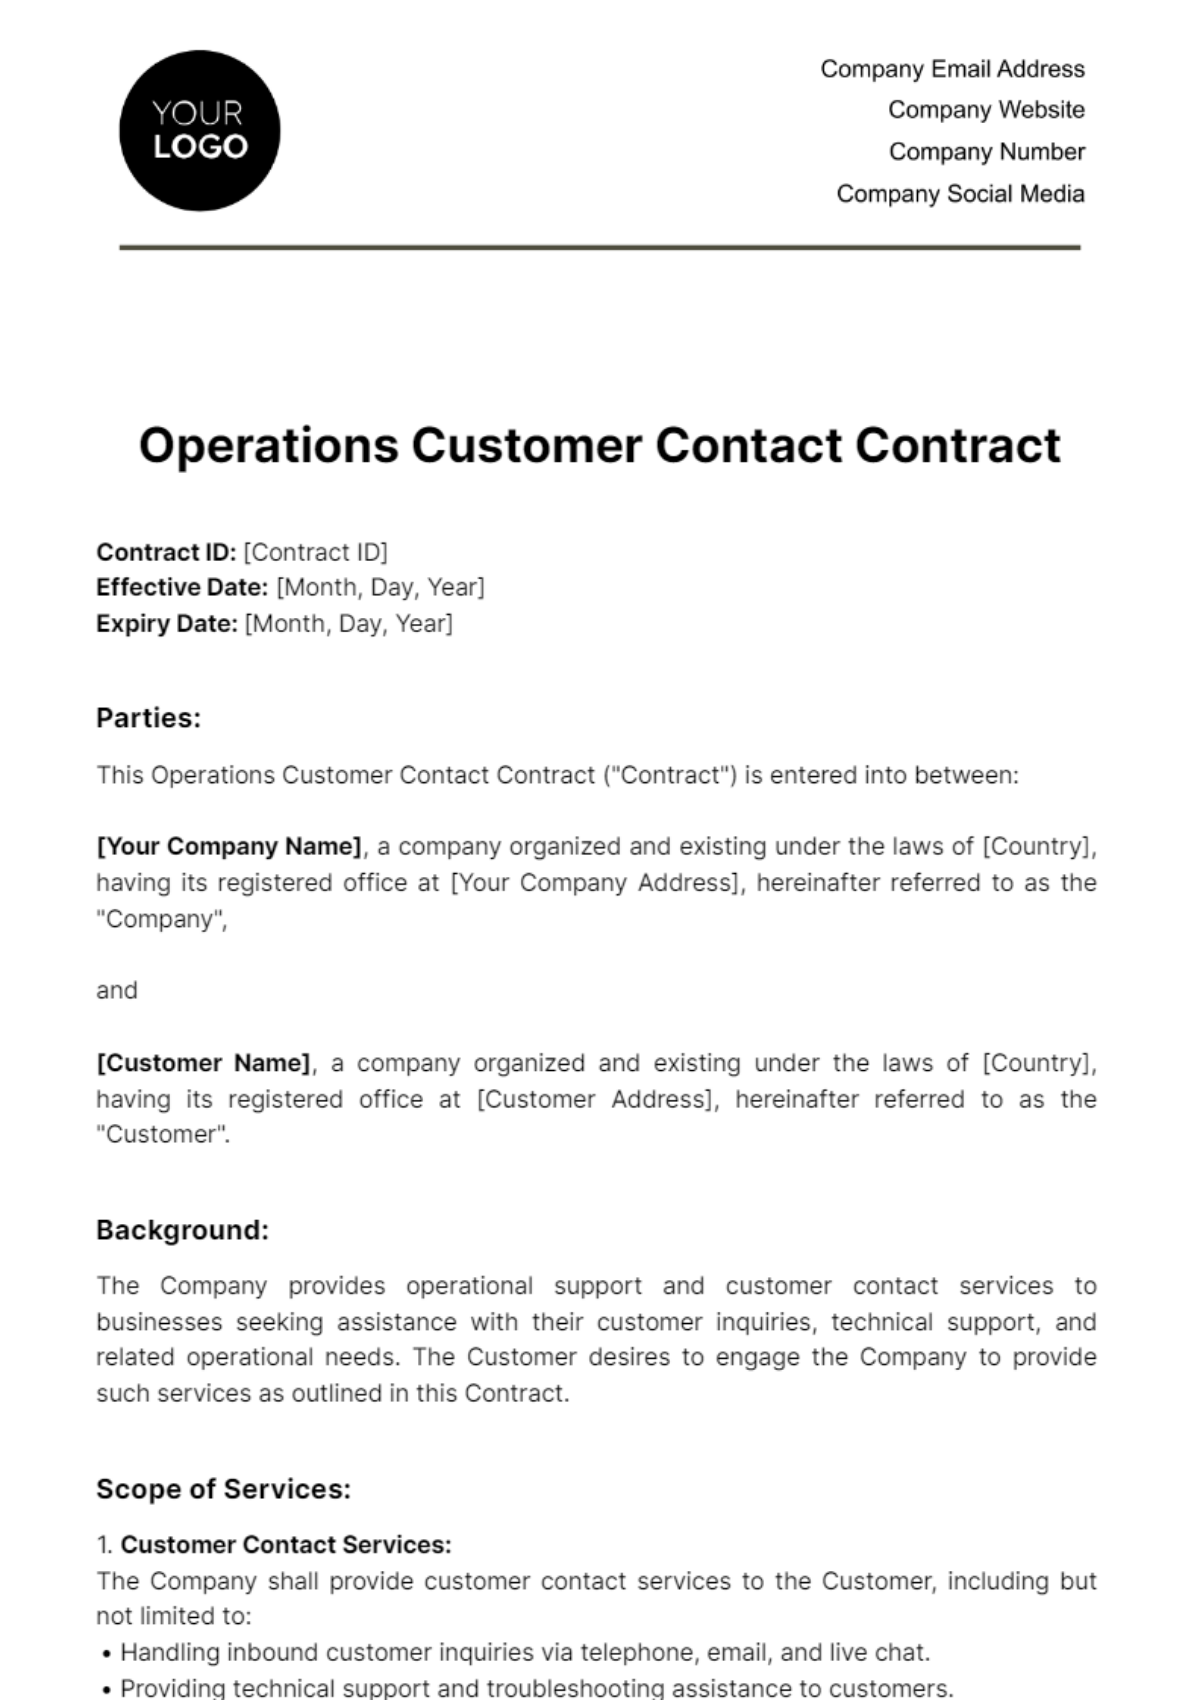 Operations Customer Contact Contract Template